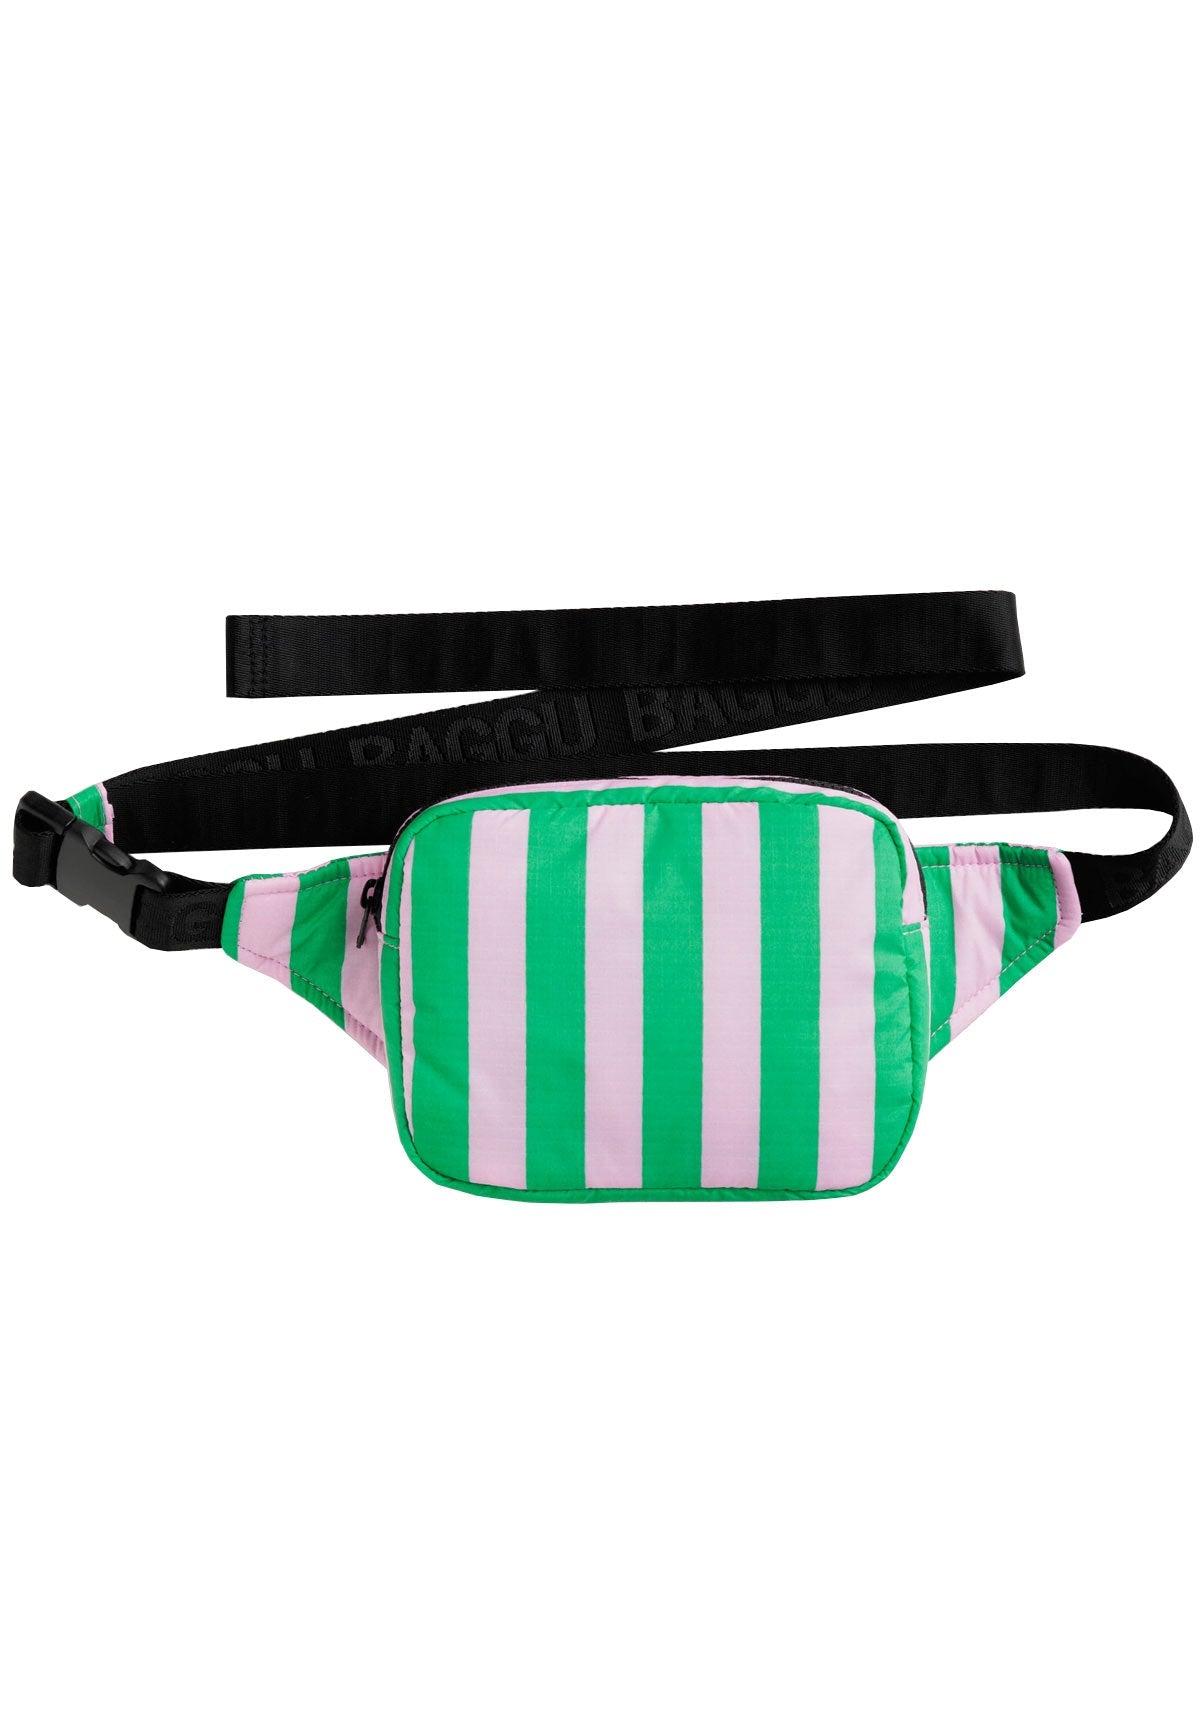 PUFFY FANNY PACK PINK GREEN AWNING STRIPE